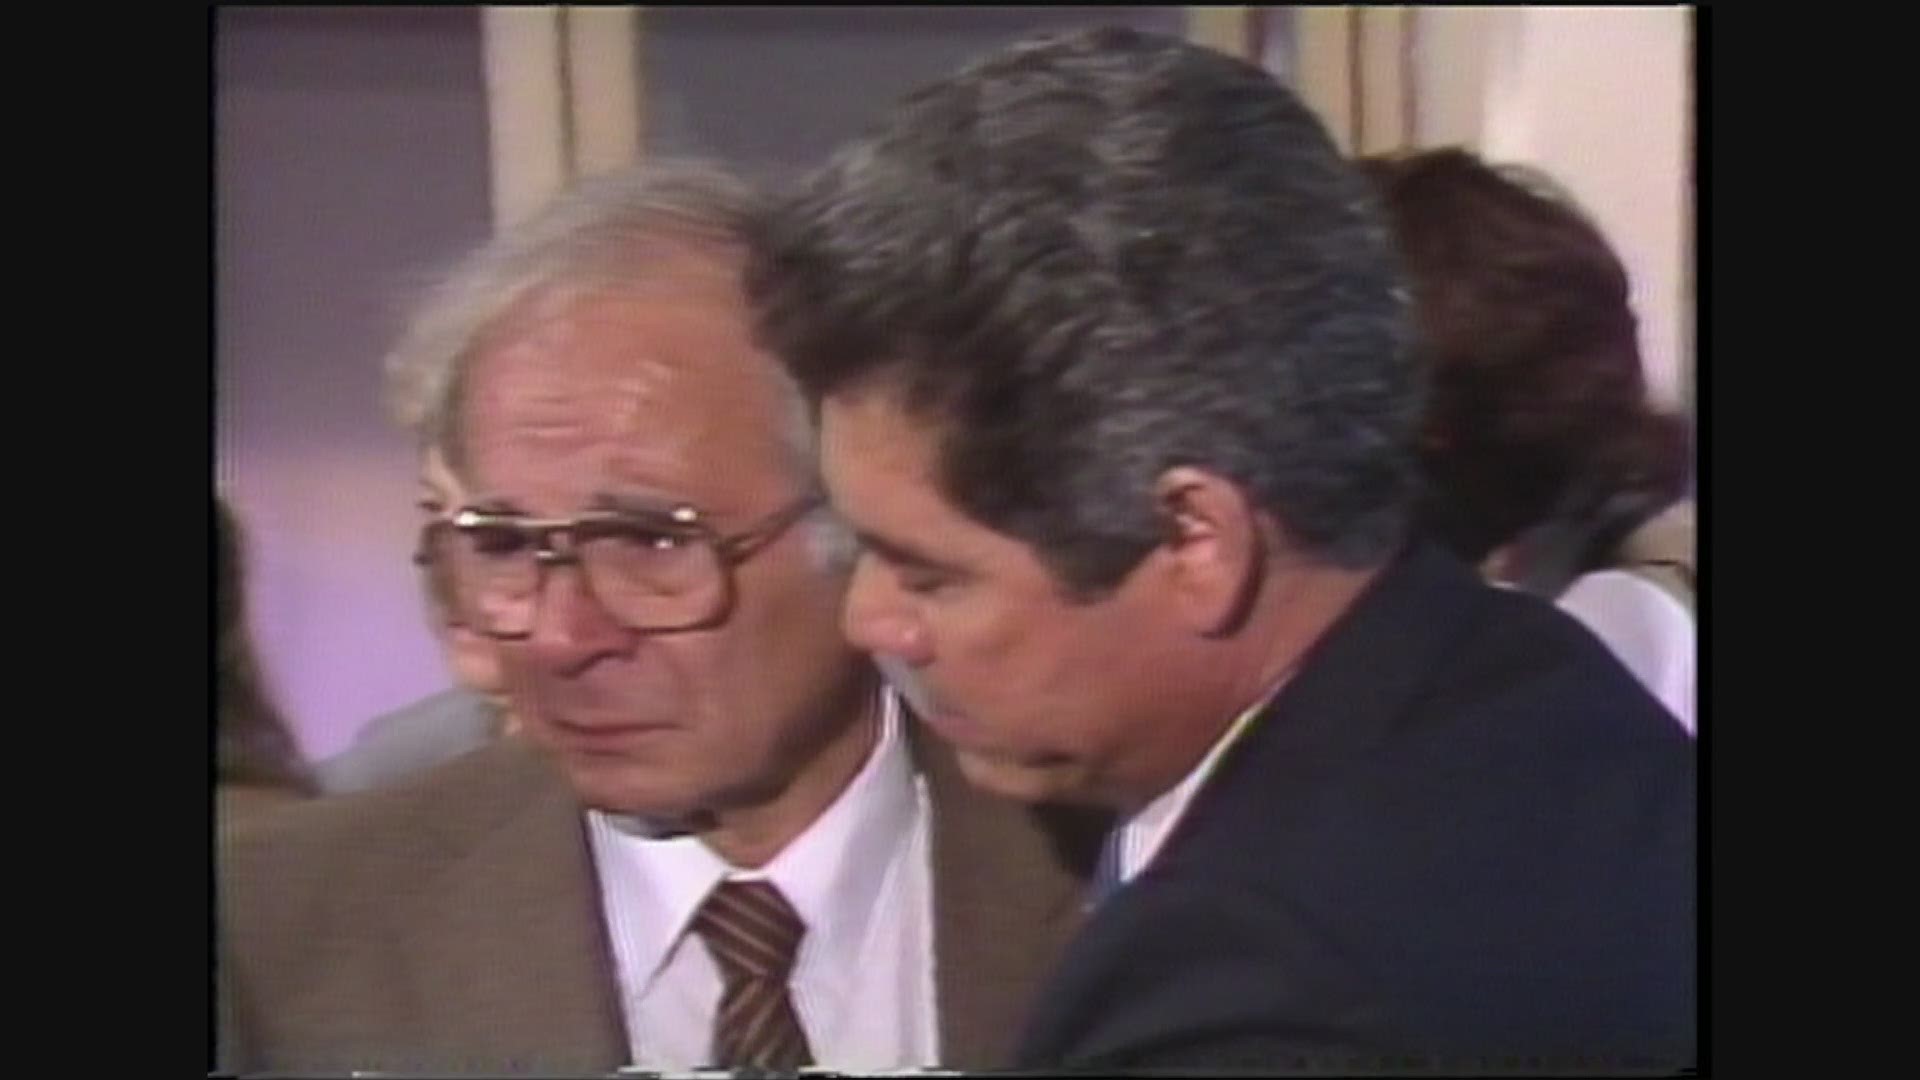 WFAA's original report about the death of Alberto Radelat in 1985. Radelat's death is now being linked to the infamous drug kingpin, "El Chapo."